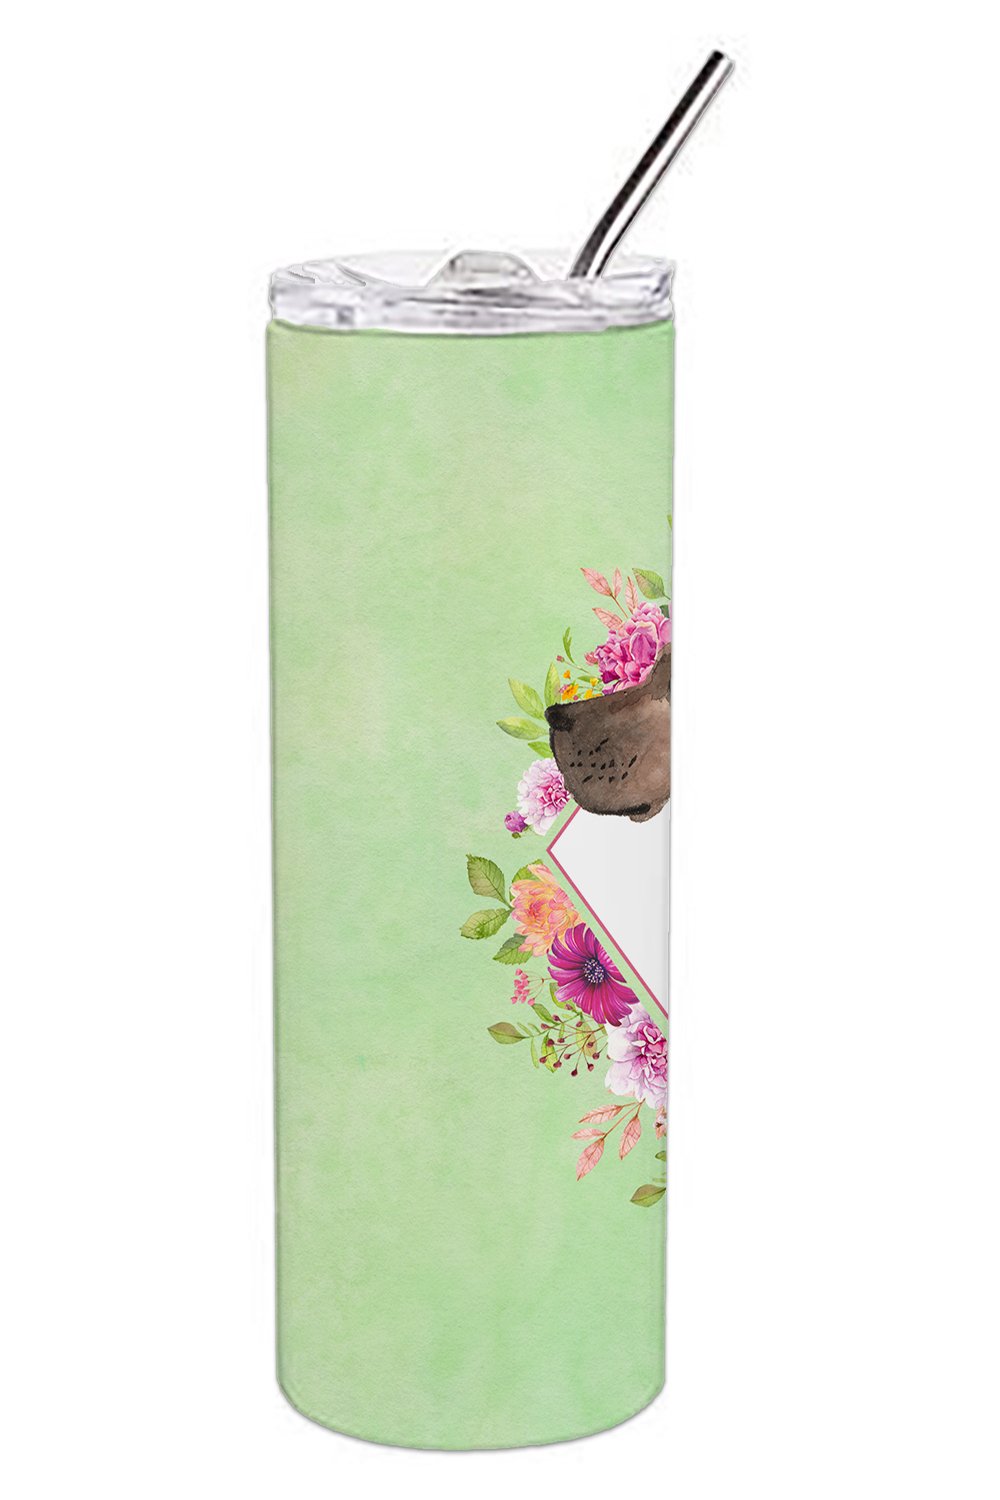 Fawn Great Dane Green Flowers Double Walled Stainless Steel 20 oz Skinny Tumbler CK4394TBL20 by Caroline's Treasures